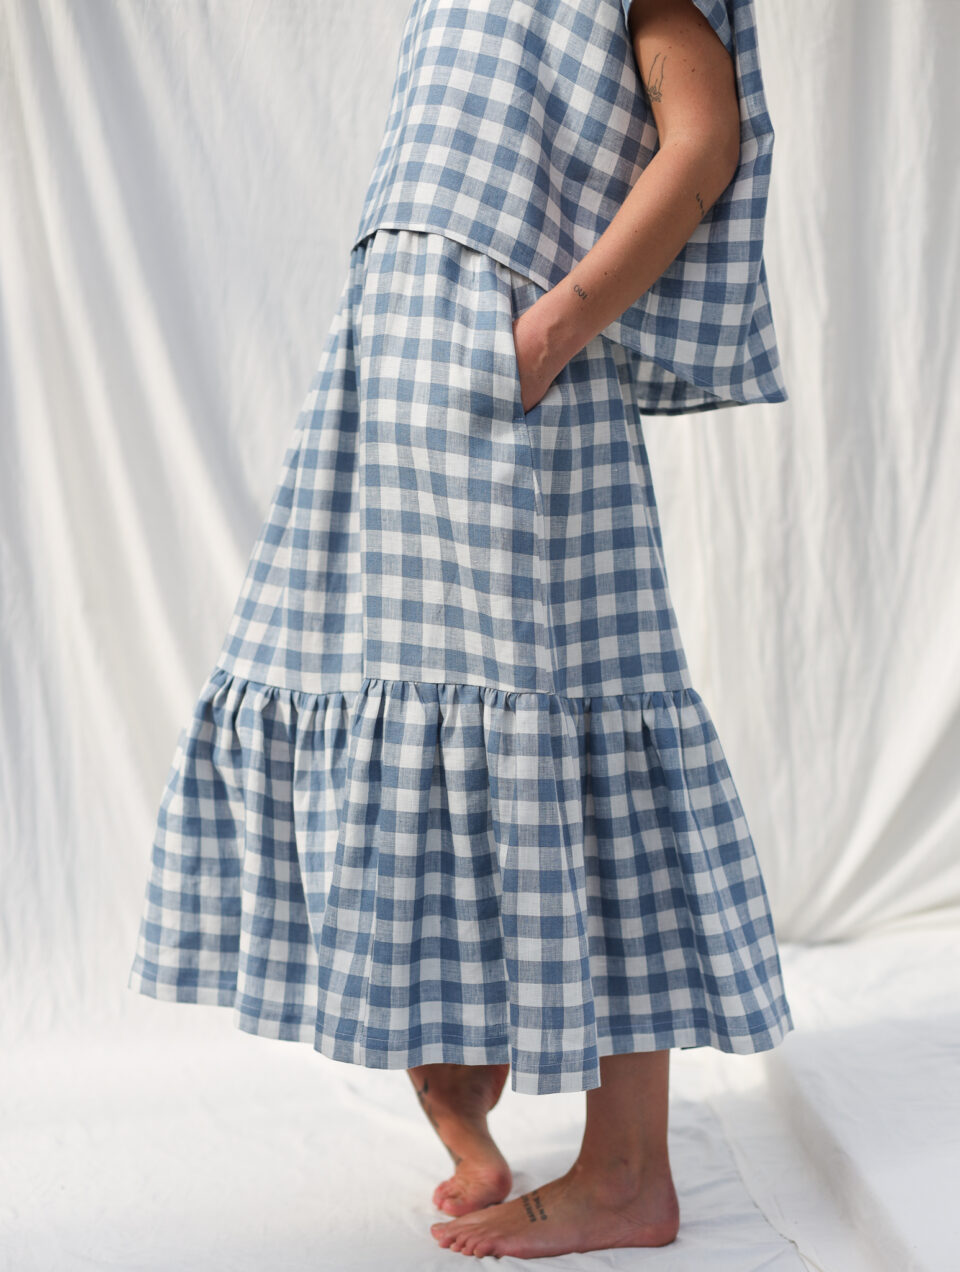 Checkered linen skirt with ruffled hem | Skirt | Sustainable clothing | OffOn clothing